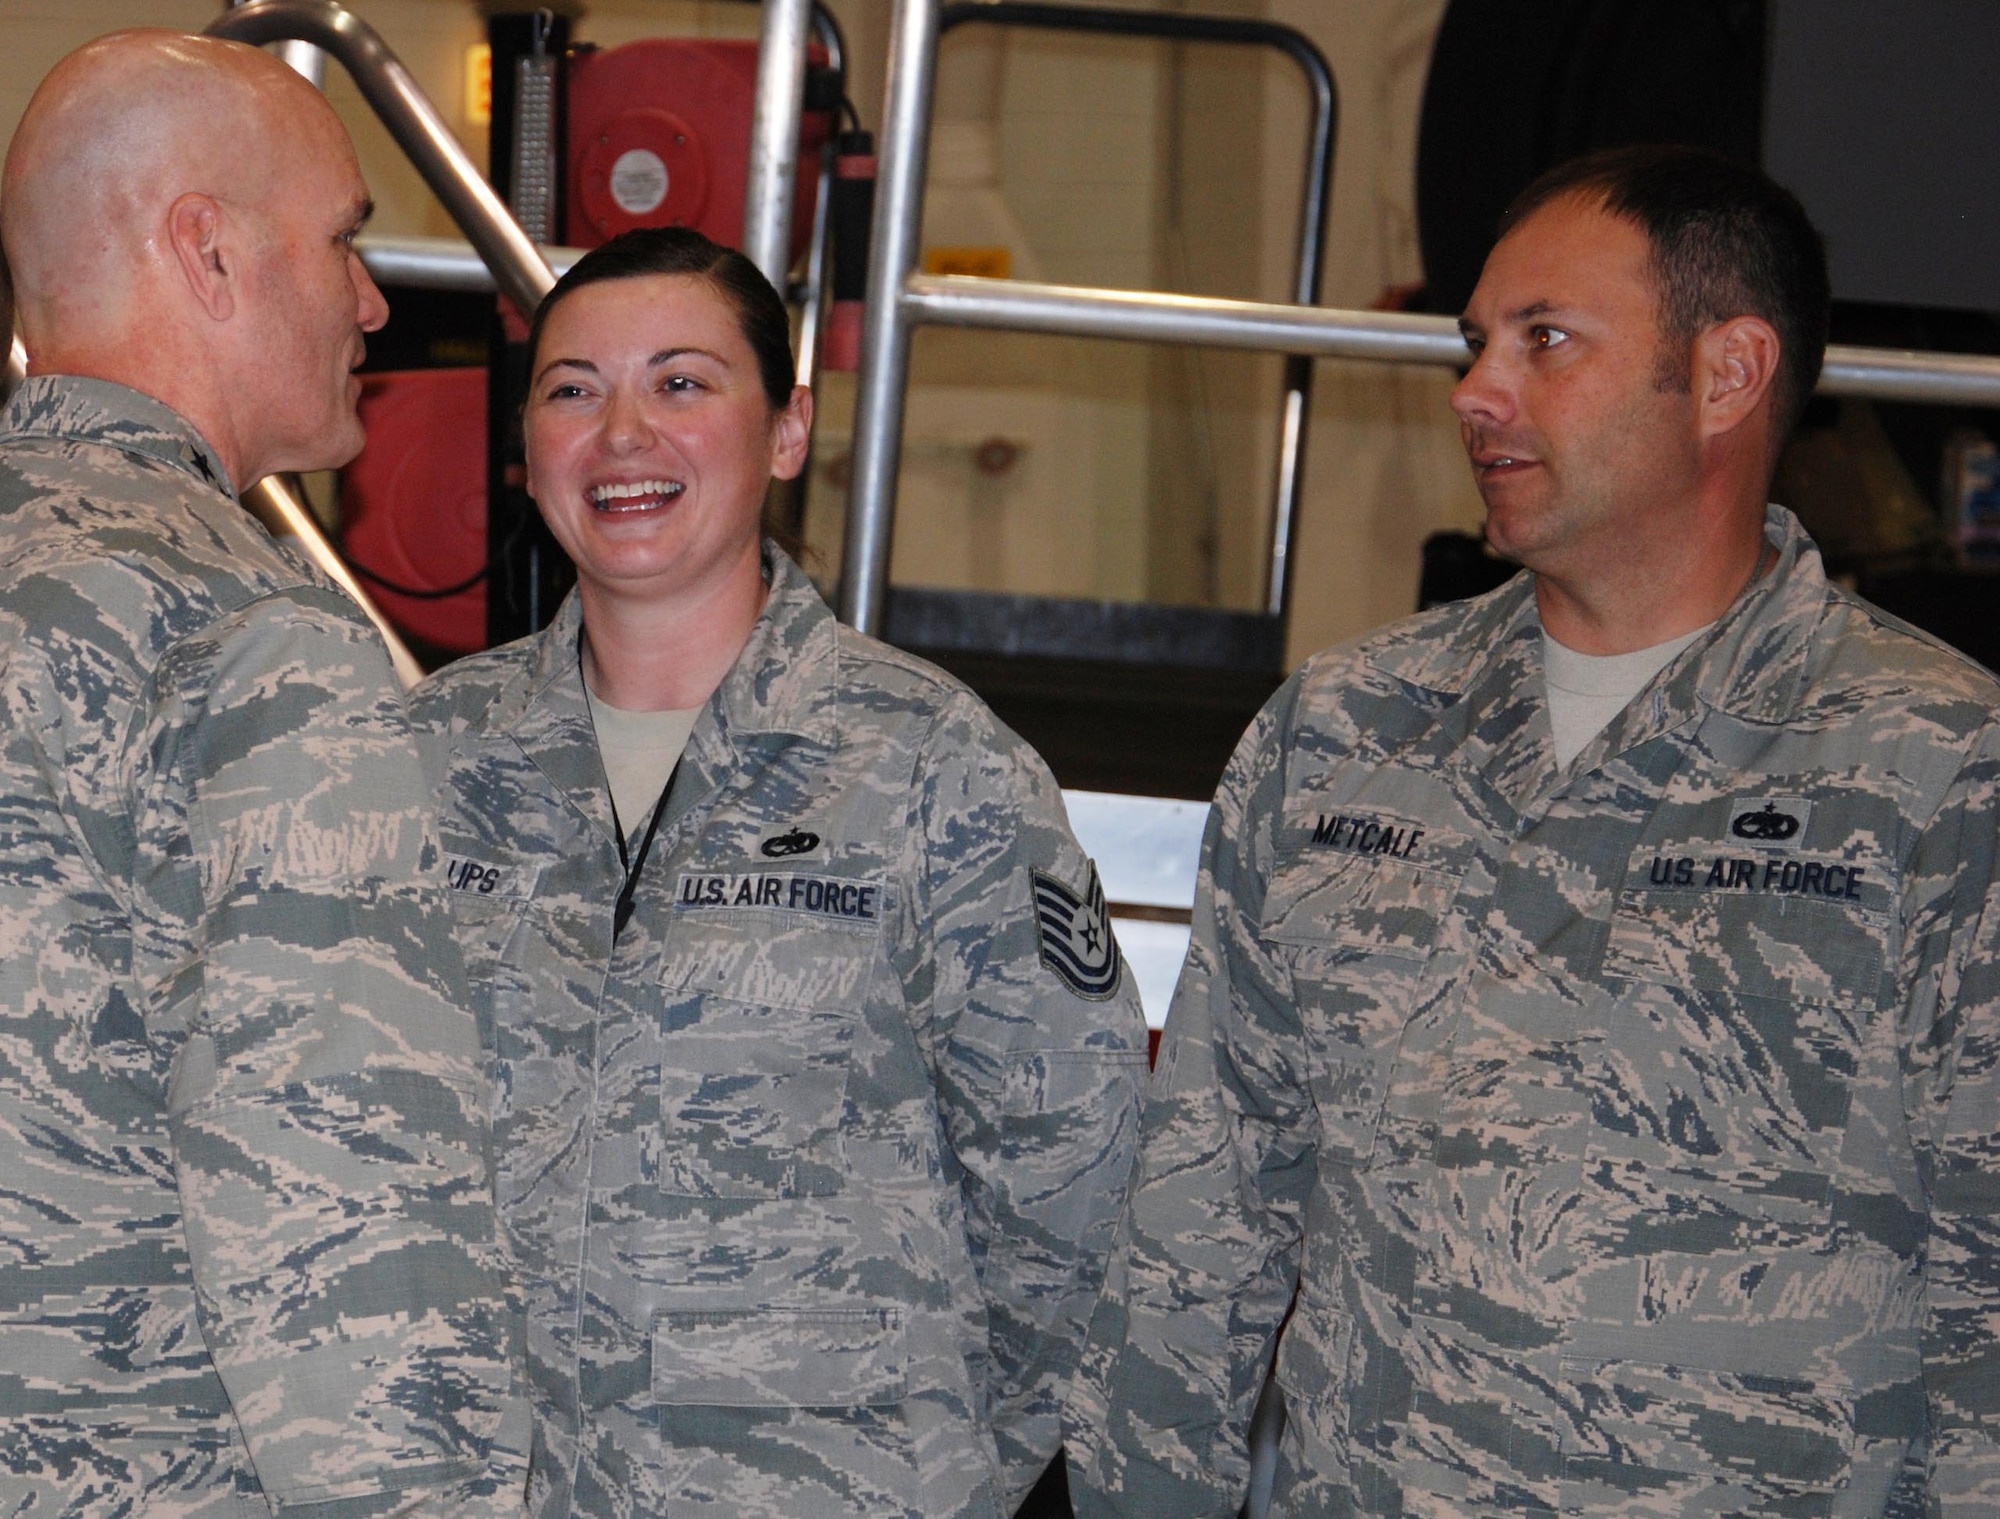 General Carlton Everhart, Air Mobility Command commander, greets Tech. Sgt. Anne Phillips, 931st Maintenance Squadron jet engine mechanic, and Tech. Sgt. Garrett Metcalf, 931 MXS periodic inspection crew chief, during a civic leader tour, Nov. 17, 2015, at McConnell Air Force Base, Kan. Everhart joined AMC civic leaders on a total force tour to display the base's current aerial refueling mission. (U.S. Air Force photo by Tech. Sgt. Abigail Klein)